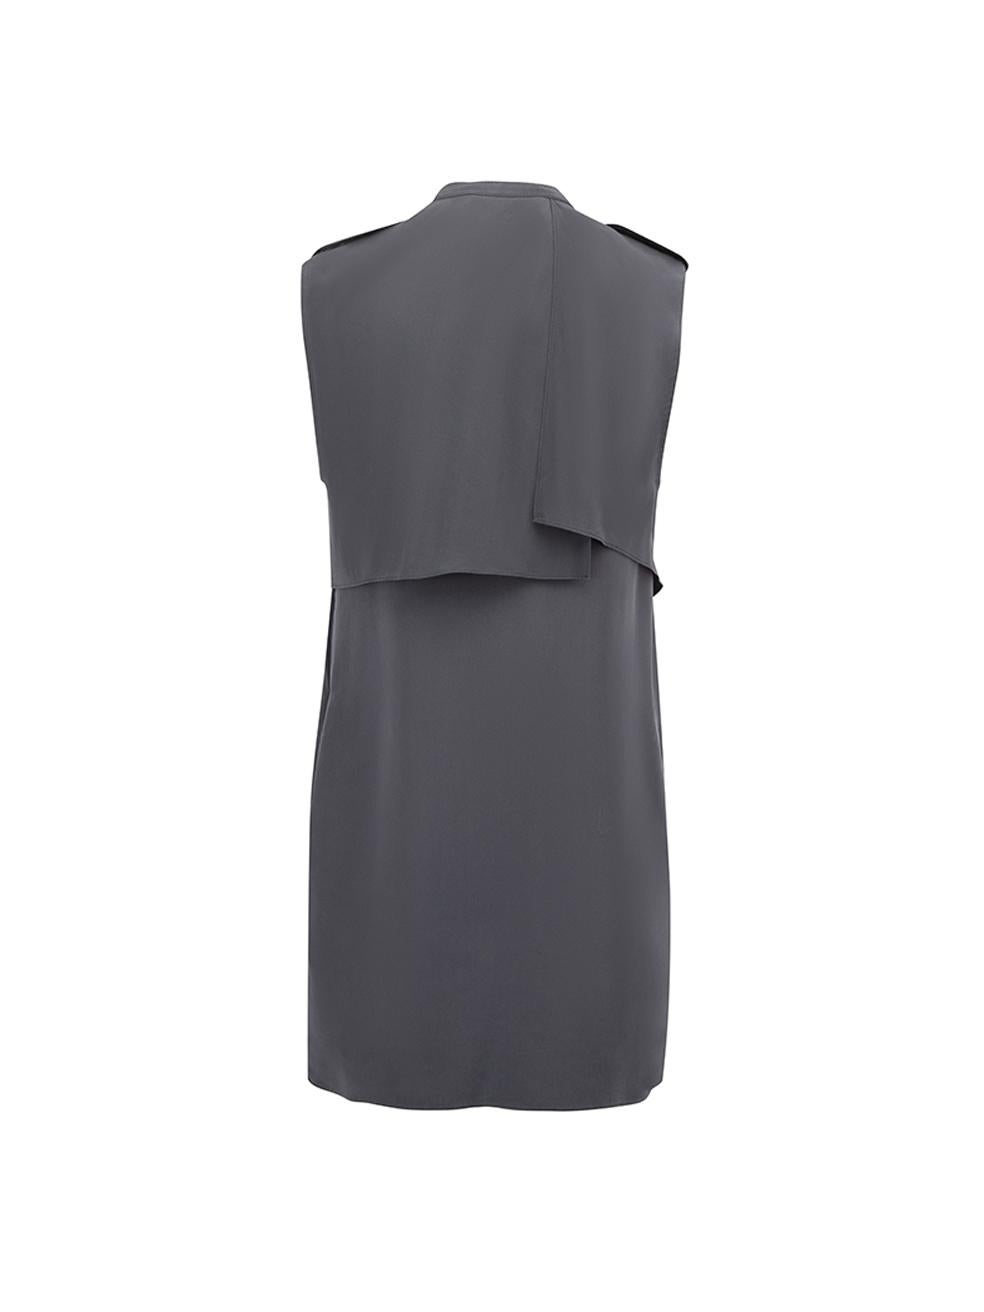 3.1 Phillip Lim Women's Grey Layered Sleeveless Mini Dress In Excellent Condition In London, GB